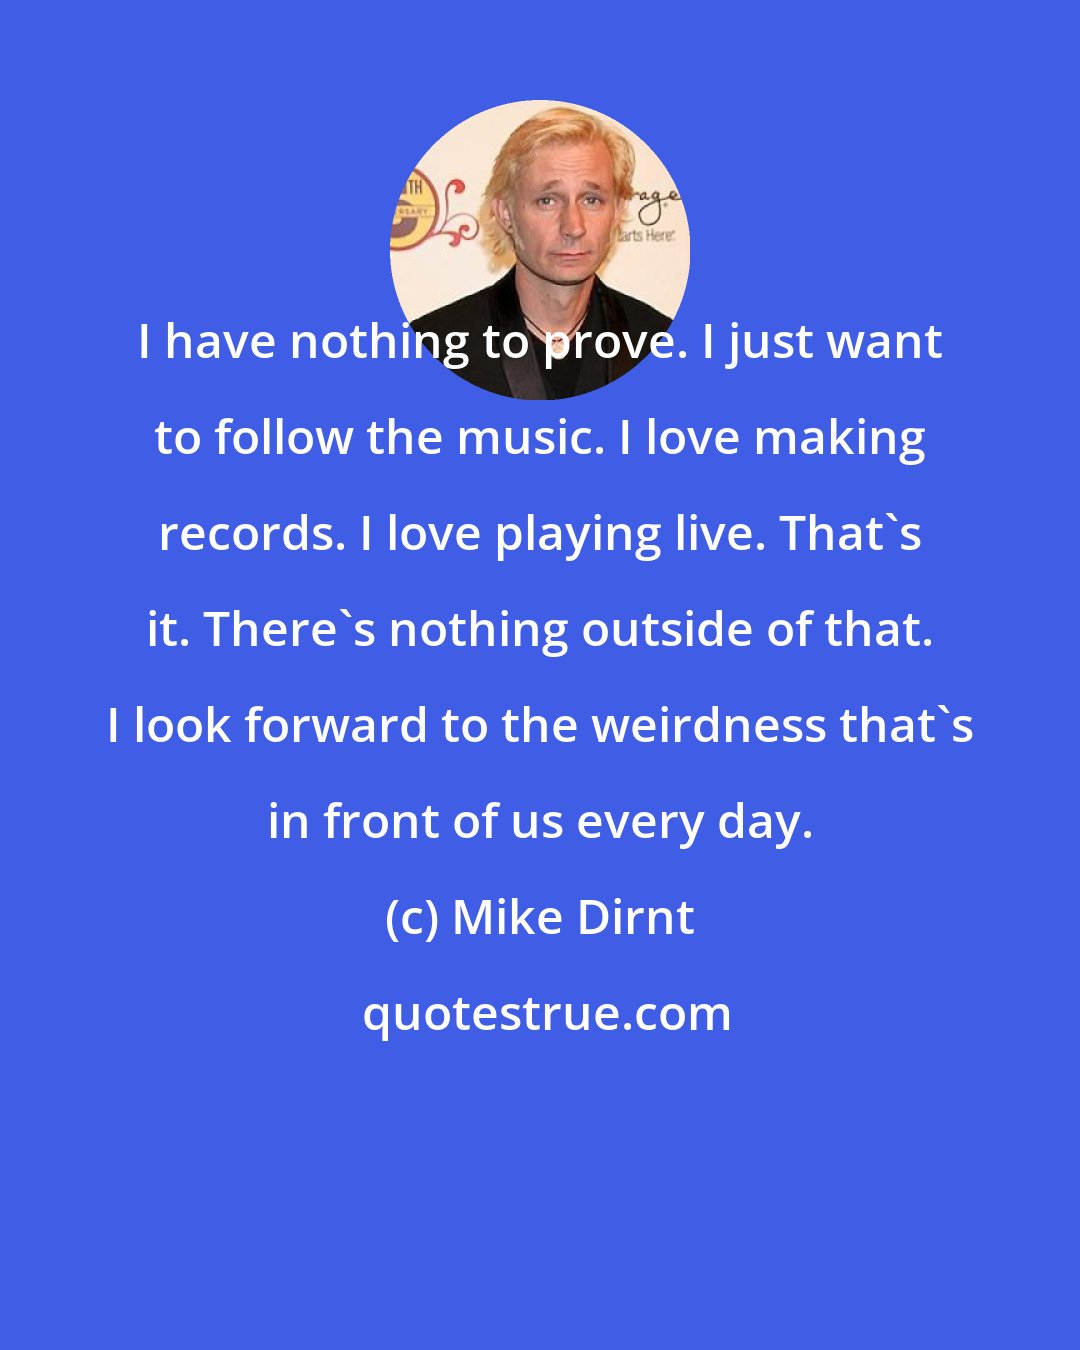 Mike Dirnt: I have nothing to prove. I just want to follow the music. I love making records. I love playing live. That's it. There's nothing outside of that. I look forward to the weirdness that's in front of us every day.